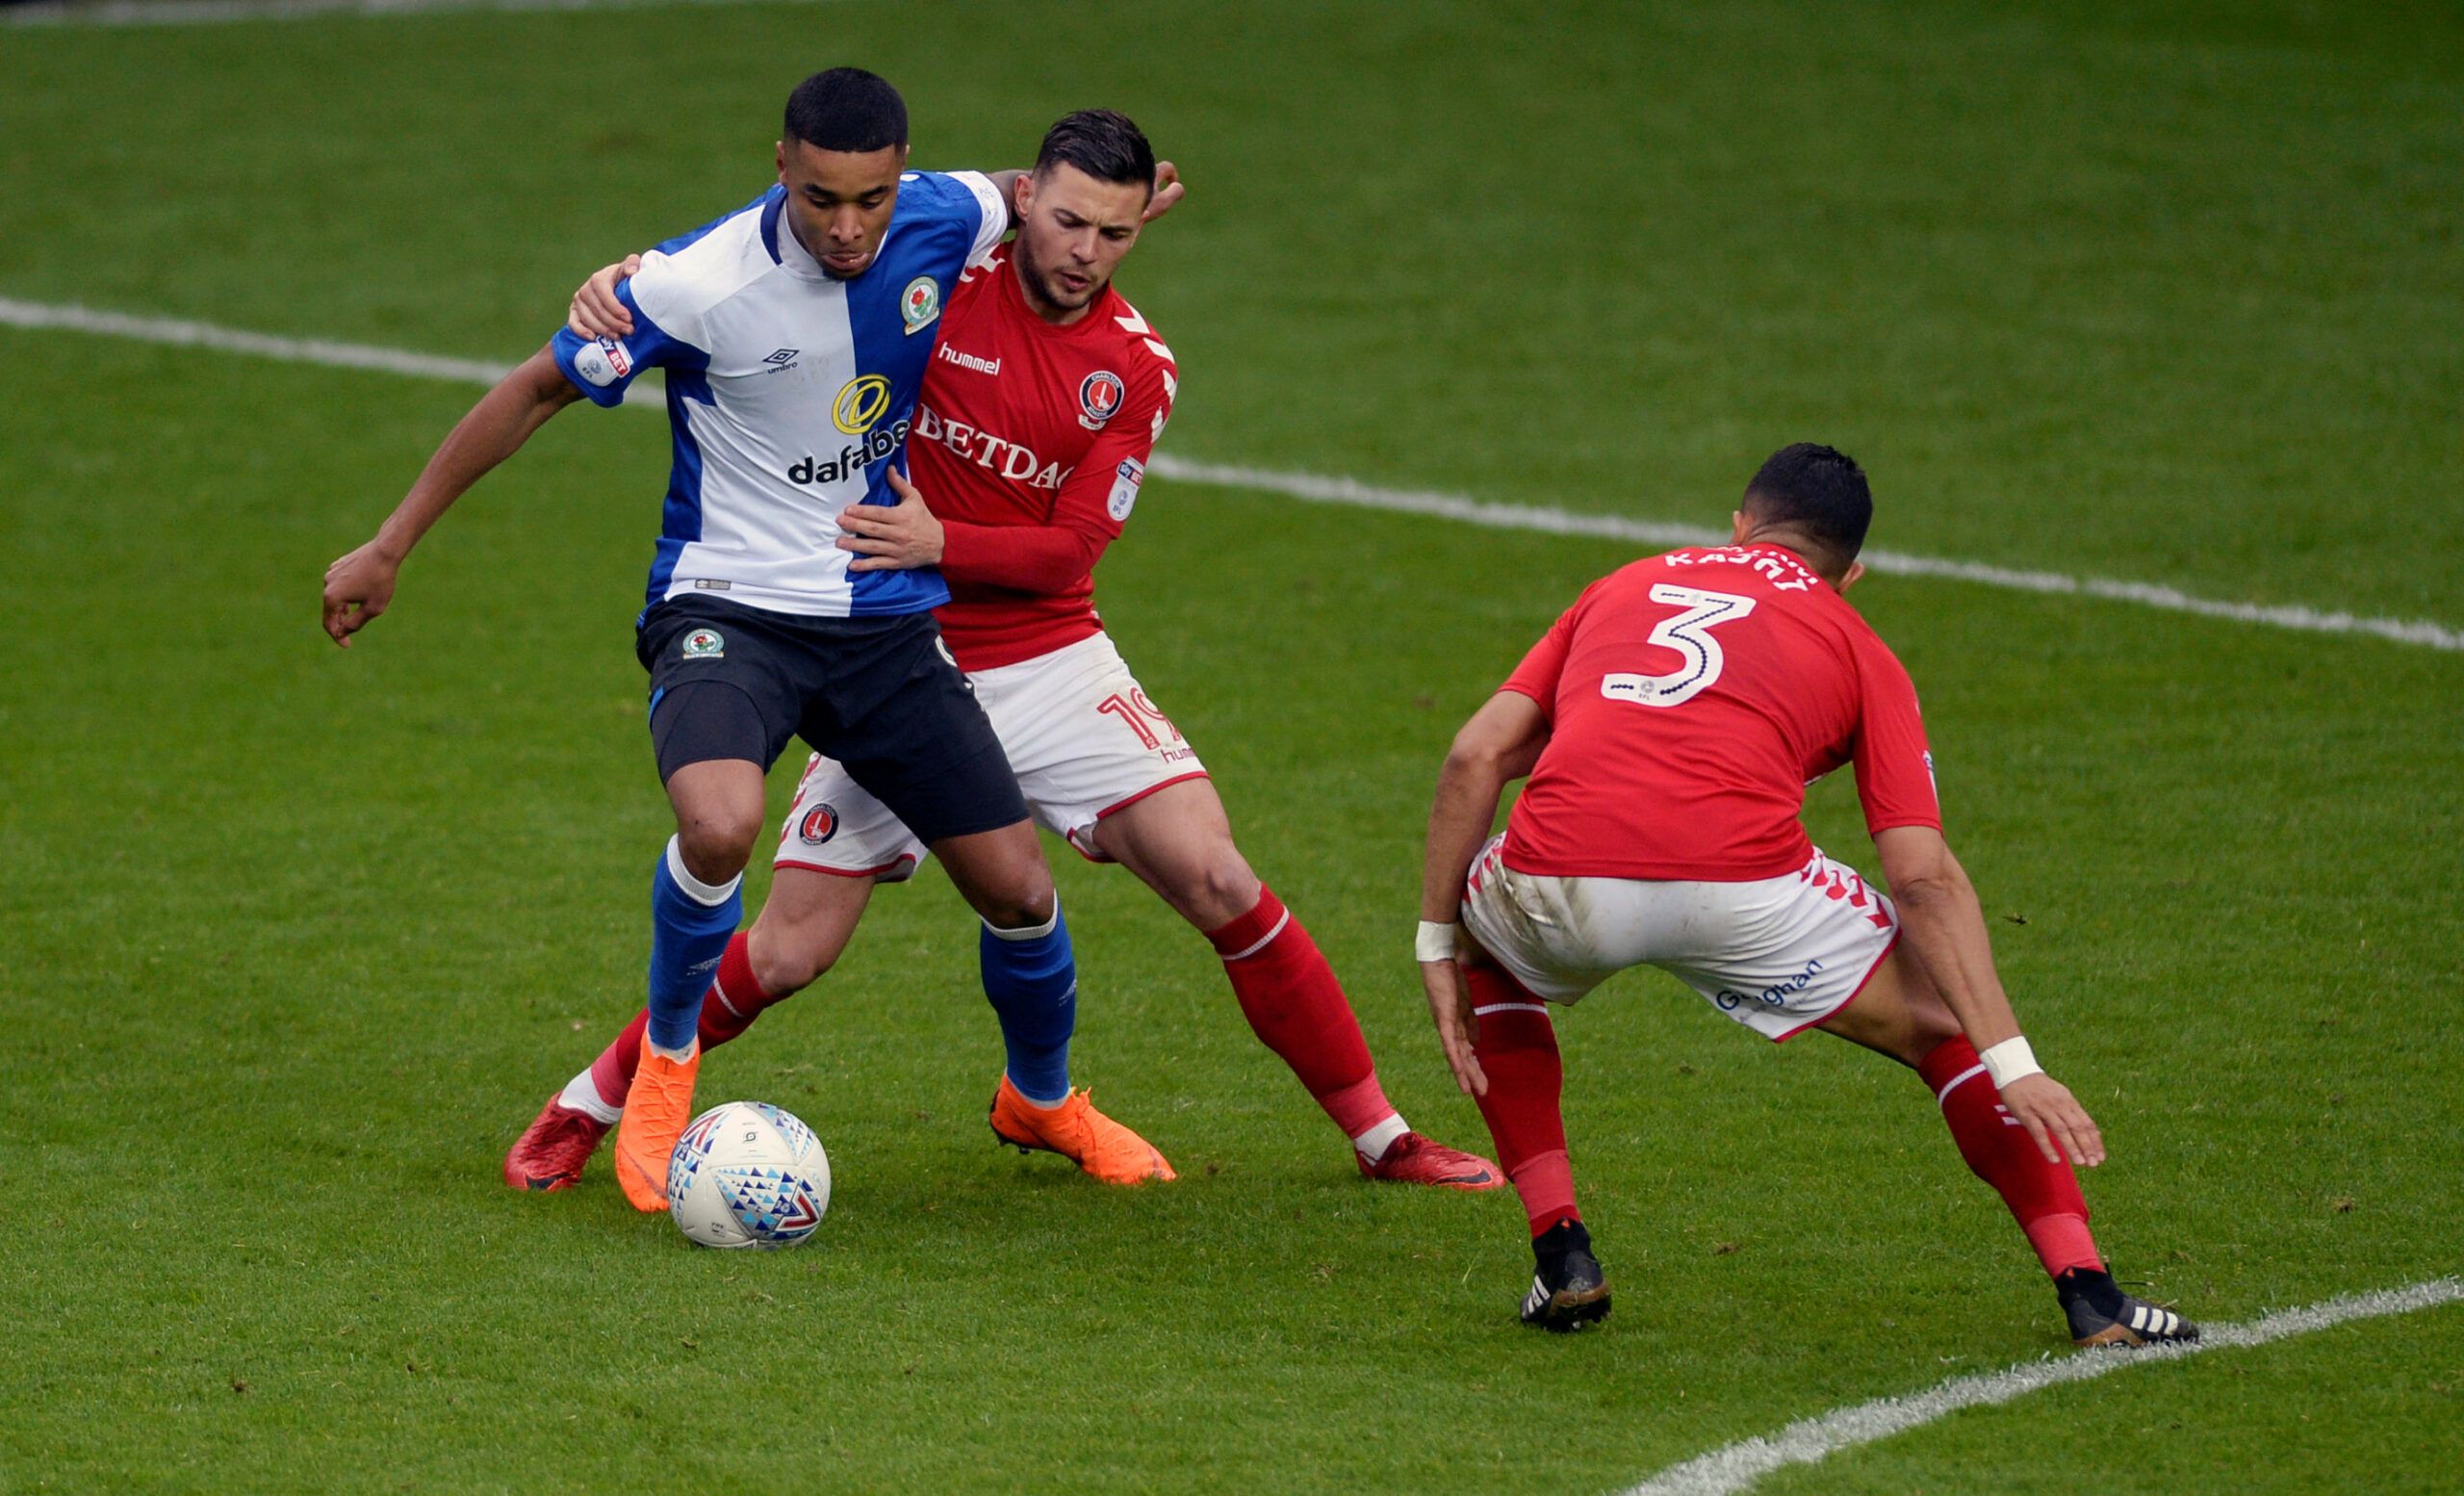 Soccer Football - Championship - Charlton Athletic v Blackburn Rovers - The Valley, London, Britain - April 28, 2018  Blackburn Rovers' Dominic Samuel in action with Charlton Athletic's Jake Forster-Caskey and Ahmed Kashi  Action Images/Adam Holt  EDITORIAL USE ONLY. No use with unauthorized audio, video, data, fixture lists, club/league logos or 